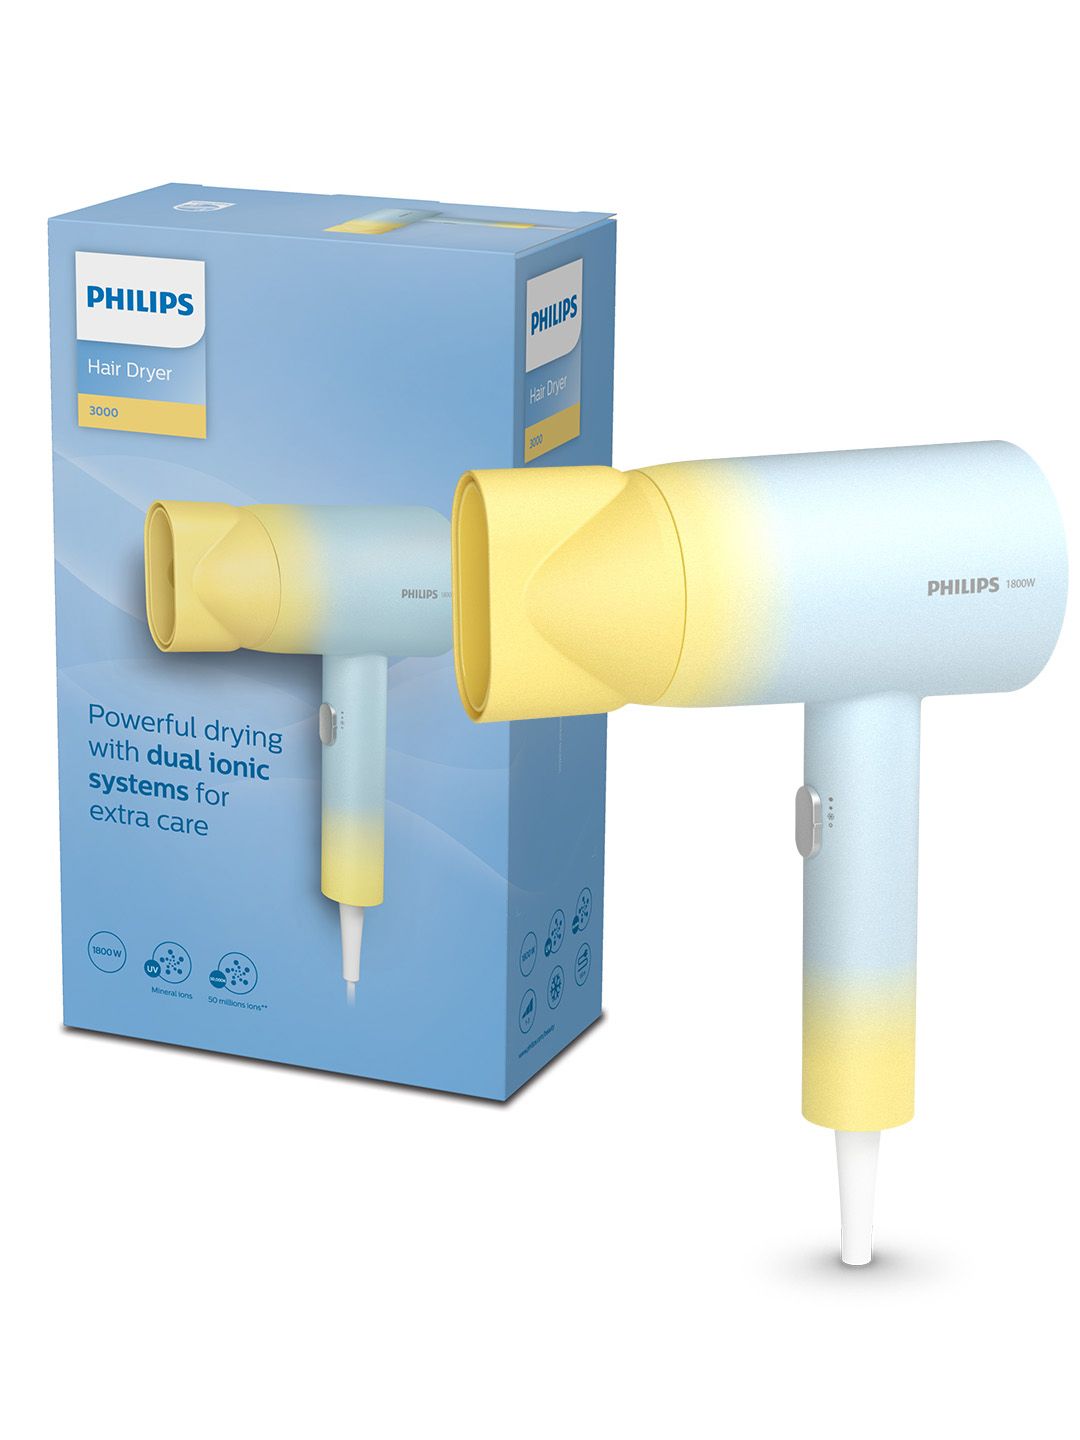 Philips BHD399/00 Mineral Ionic Care to Lower UV Damage Hair Dryer - Blue & Yellow Price in India